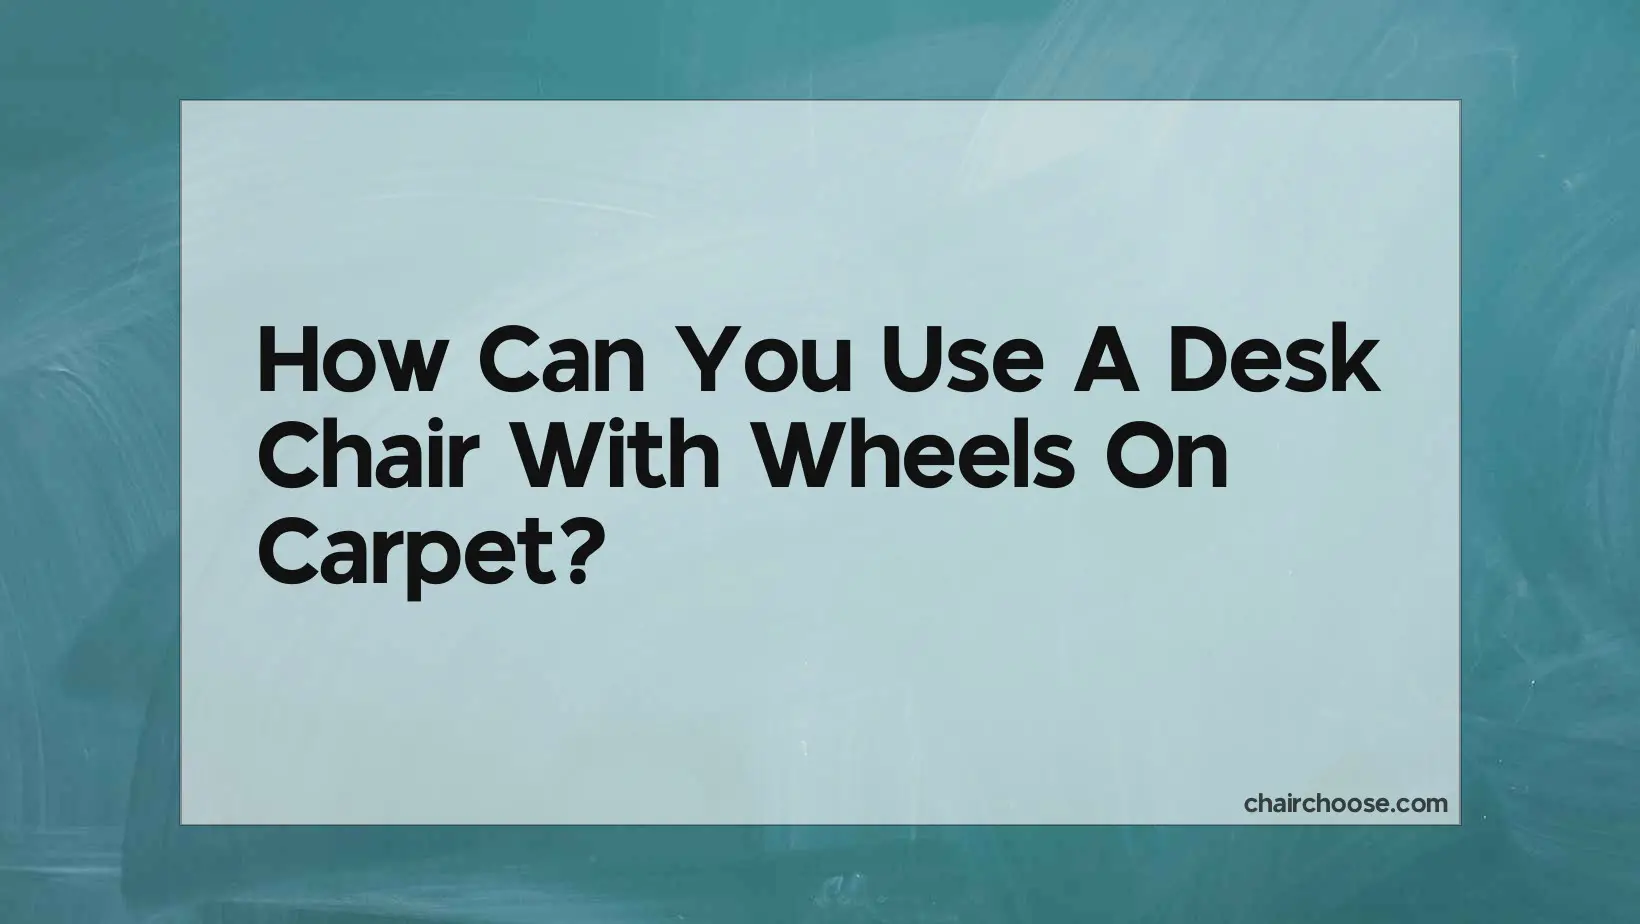 How Can You Use A Desk Chair With Wheels On Carpet?